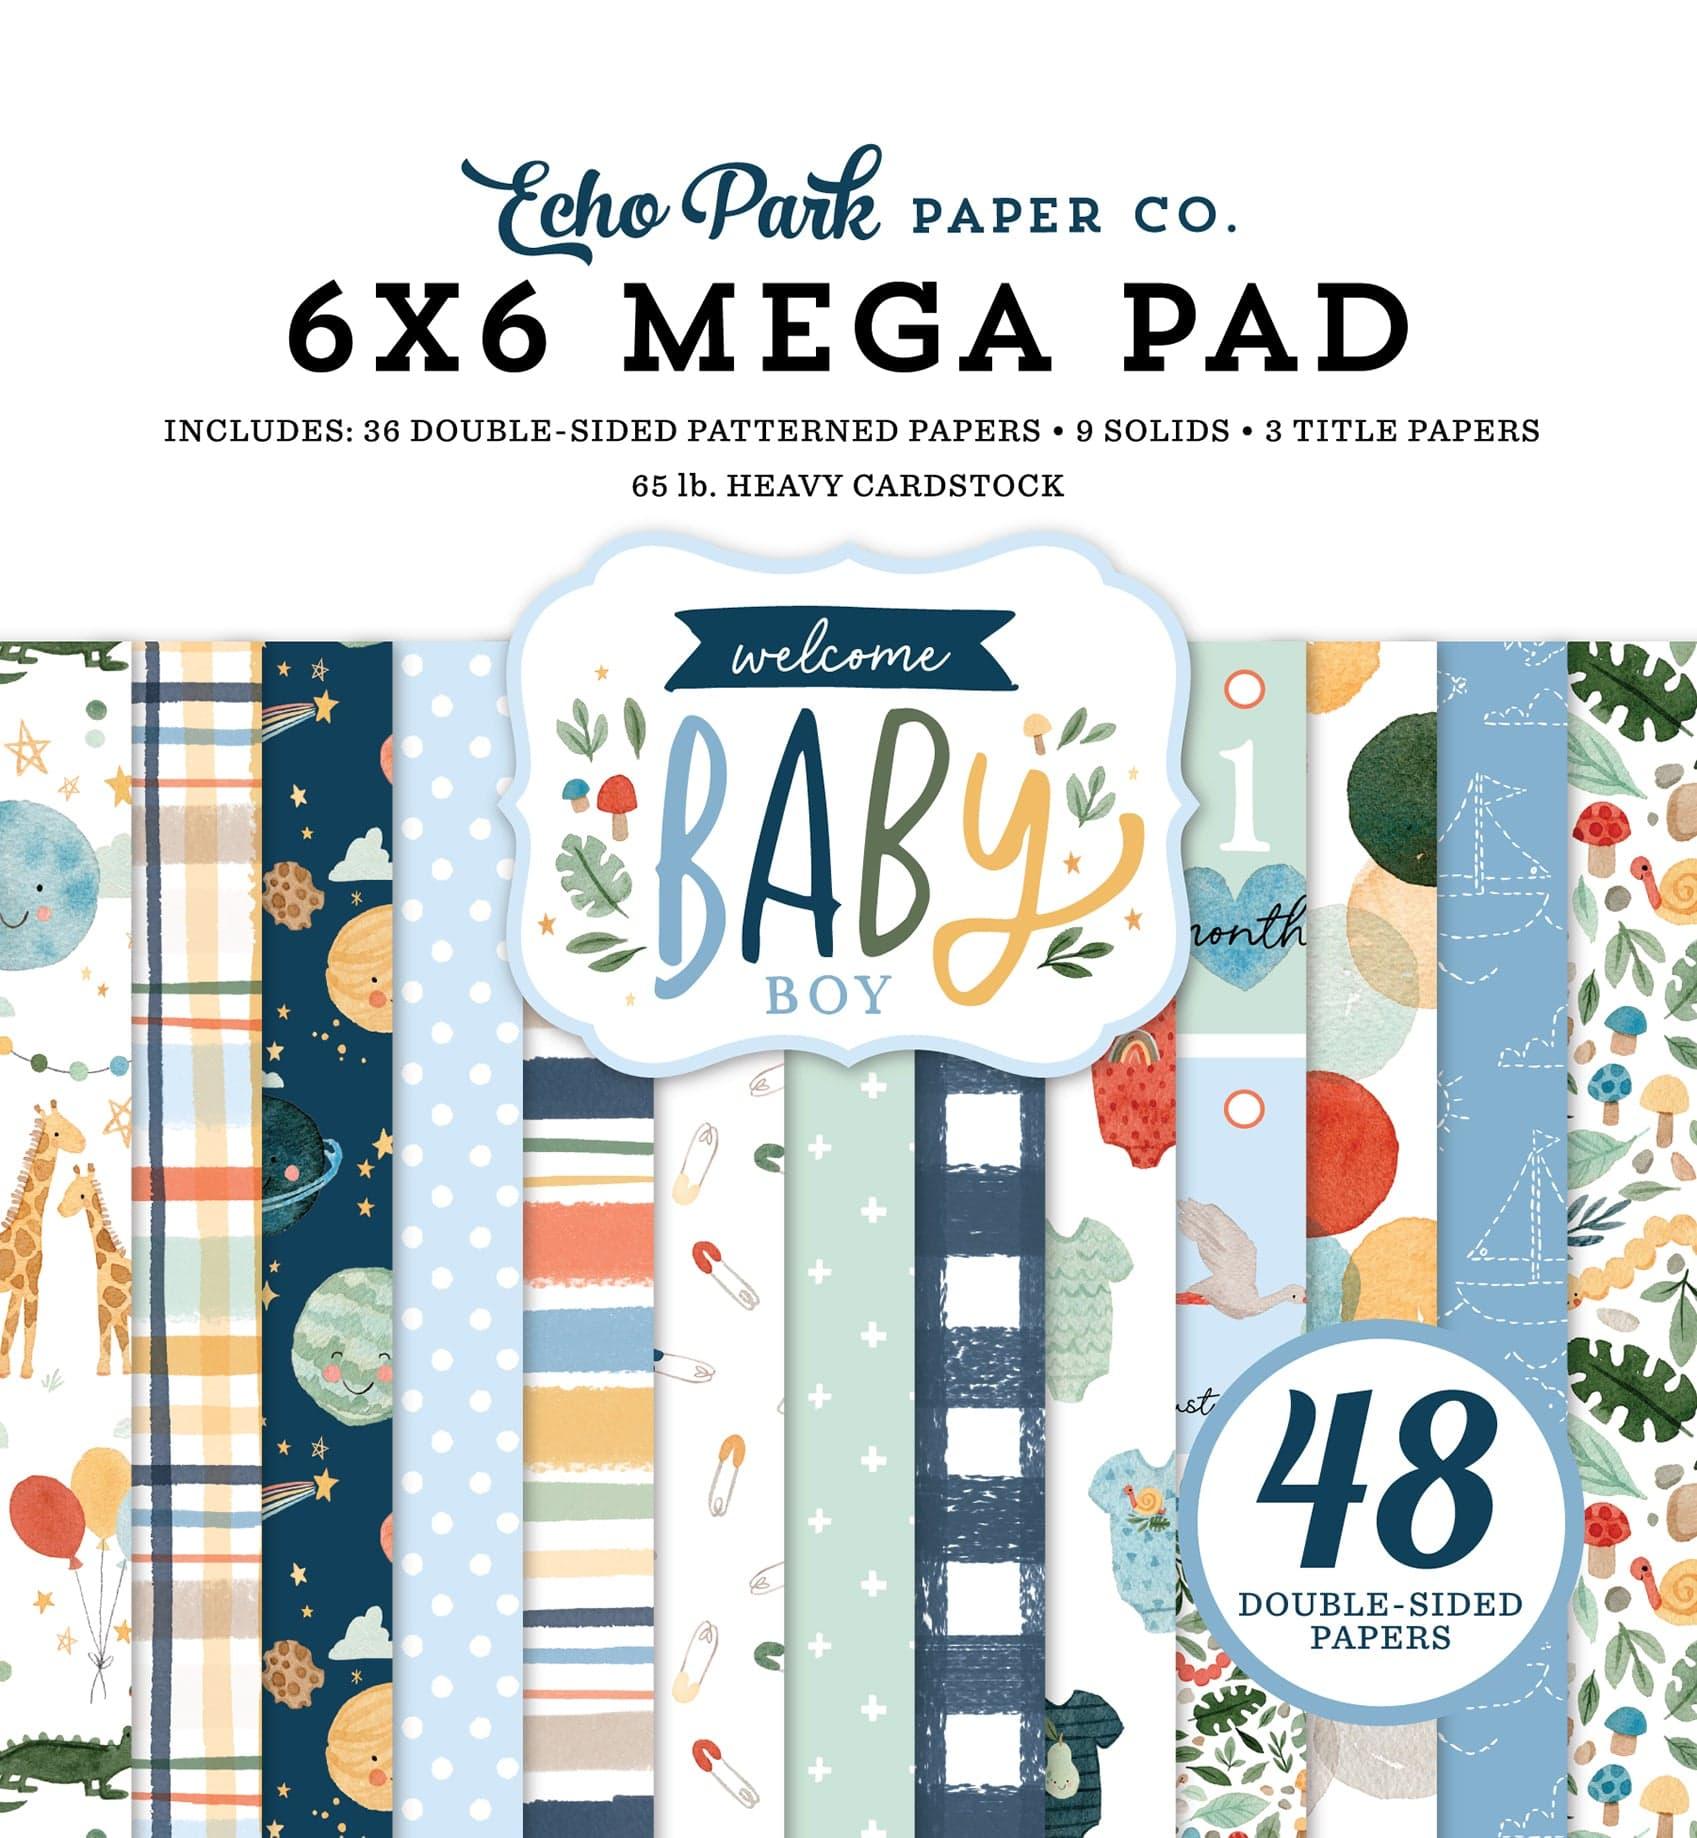 Welcome Baby Boy Collection 6 x 6 Mega Paper Pad by Echo Park Paper - 48 Double-Sided Papers - Scrapbook Supply Companies